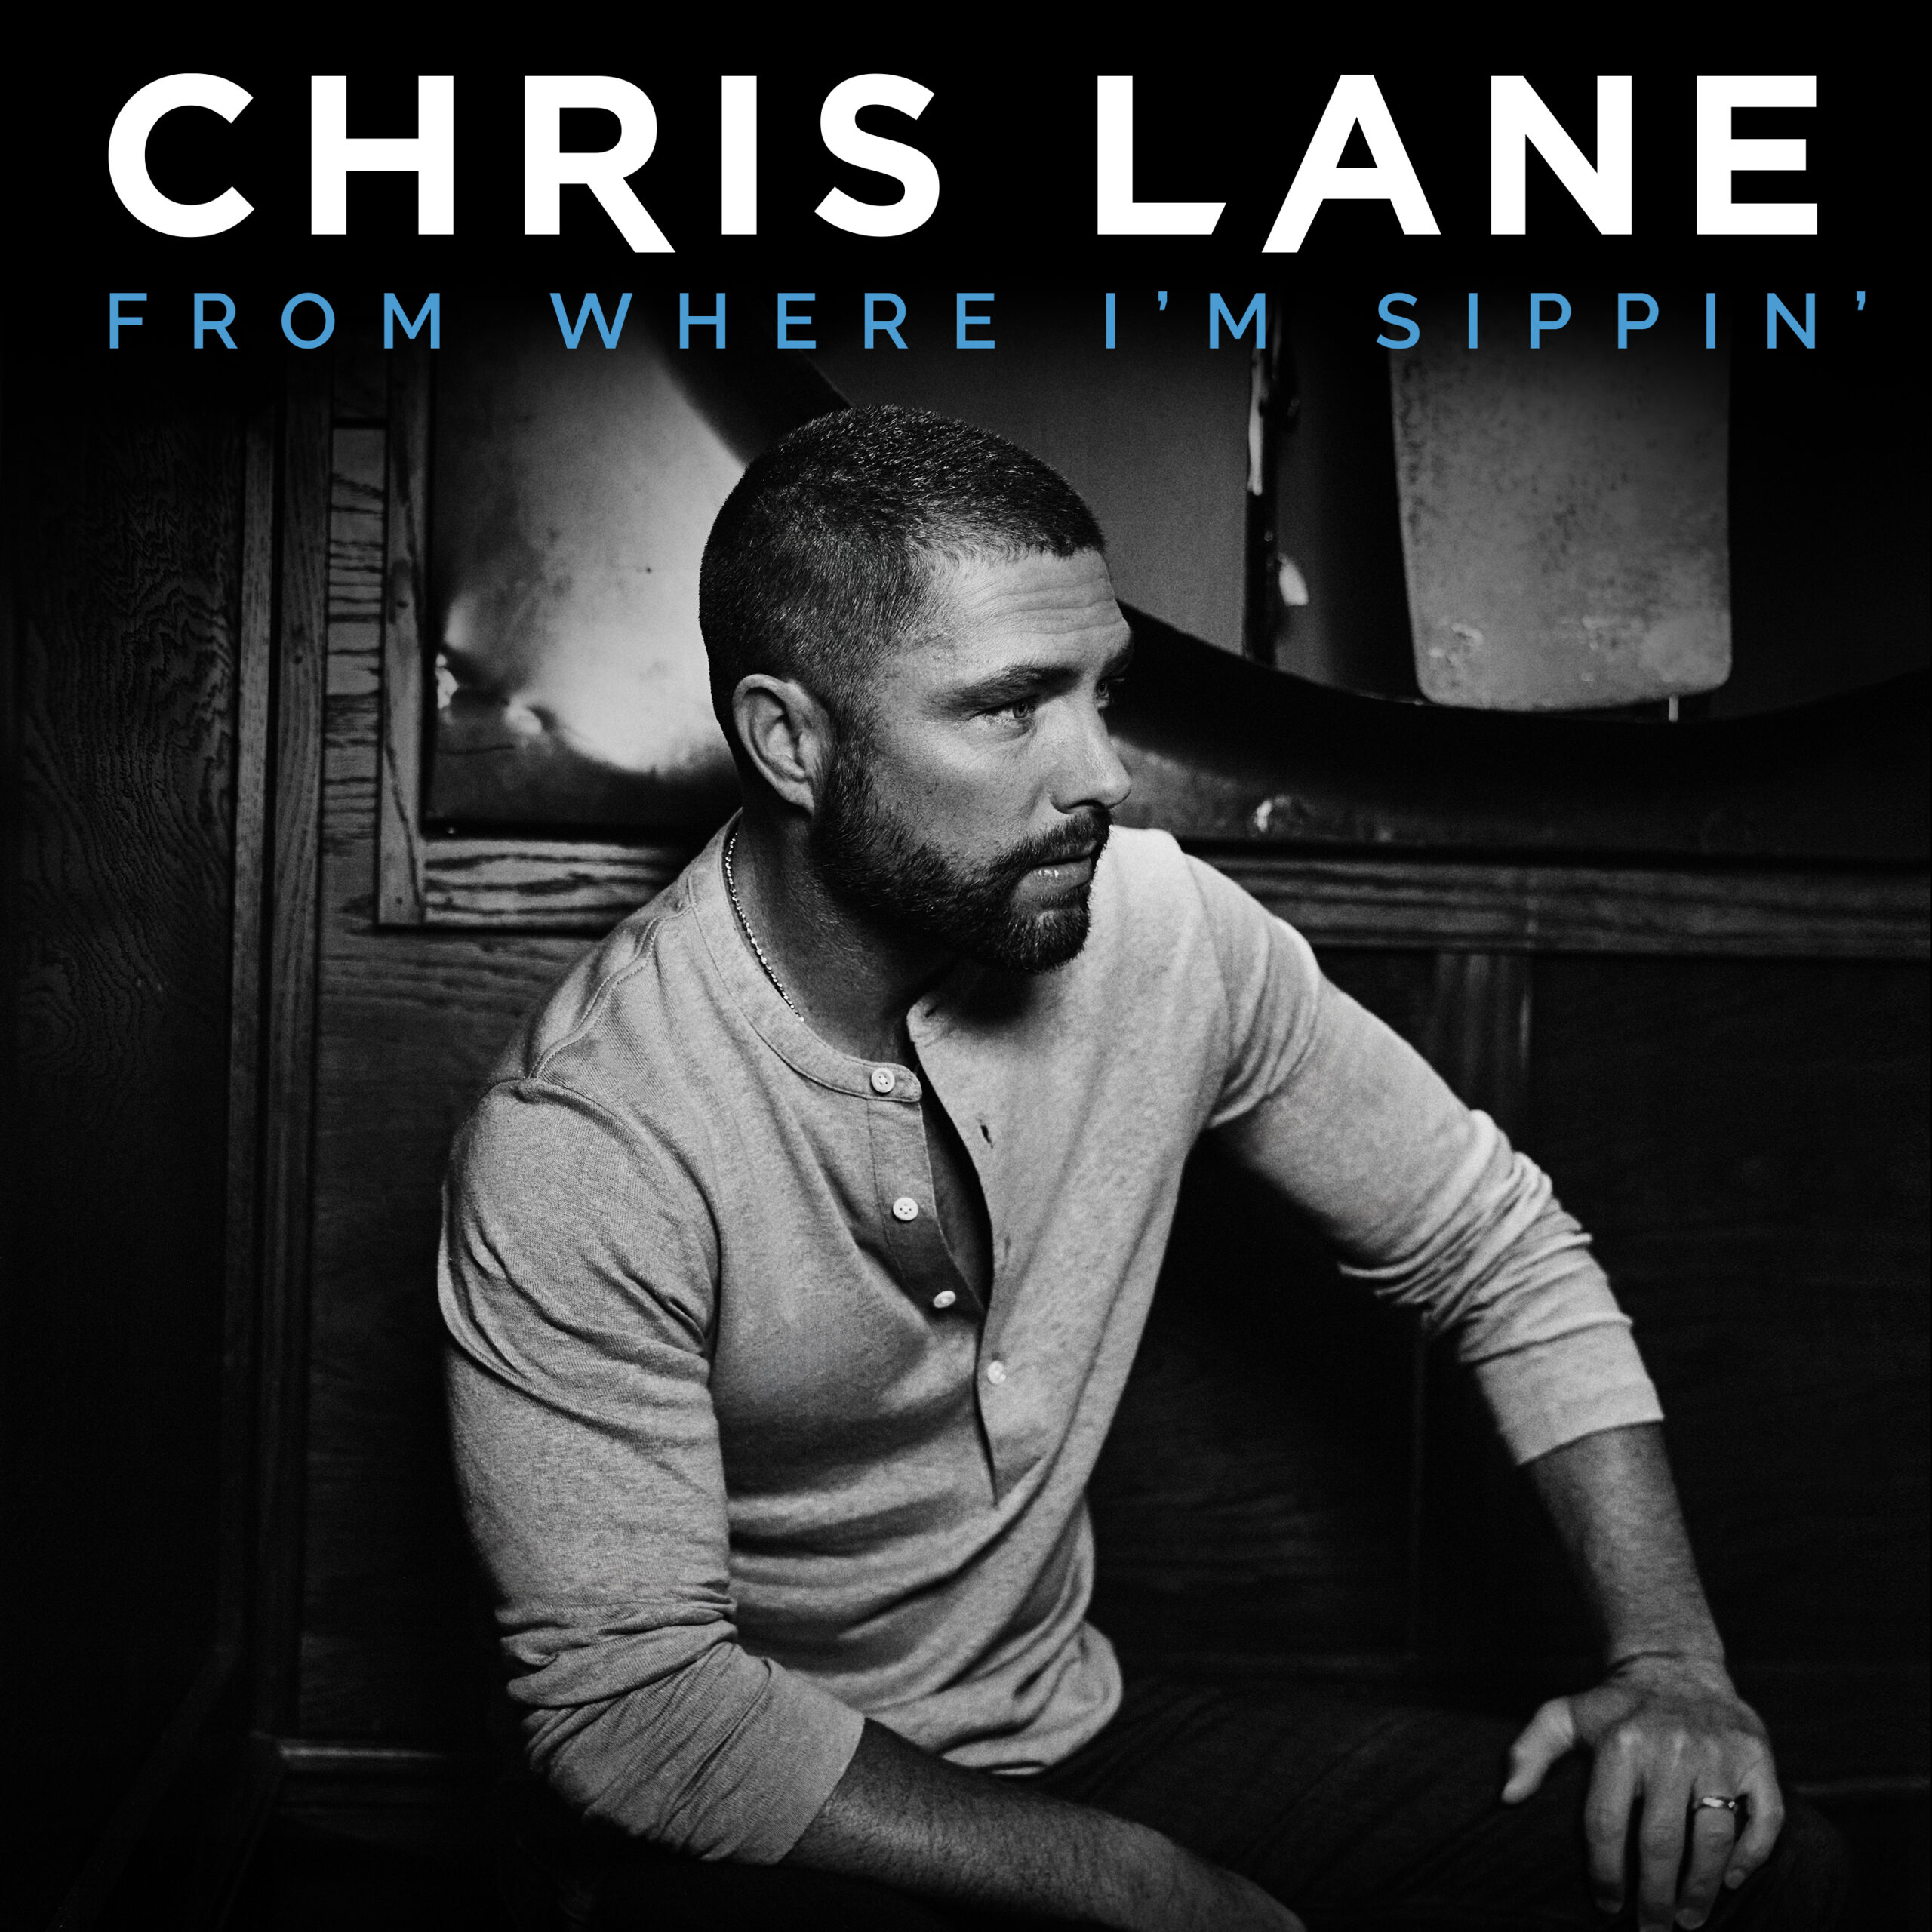 Chris Lane Talks Entering a New Era of Music with New Label and EP “From Where I’m Sippin'” (Exclusive)